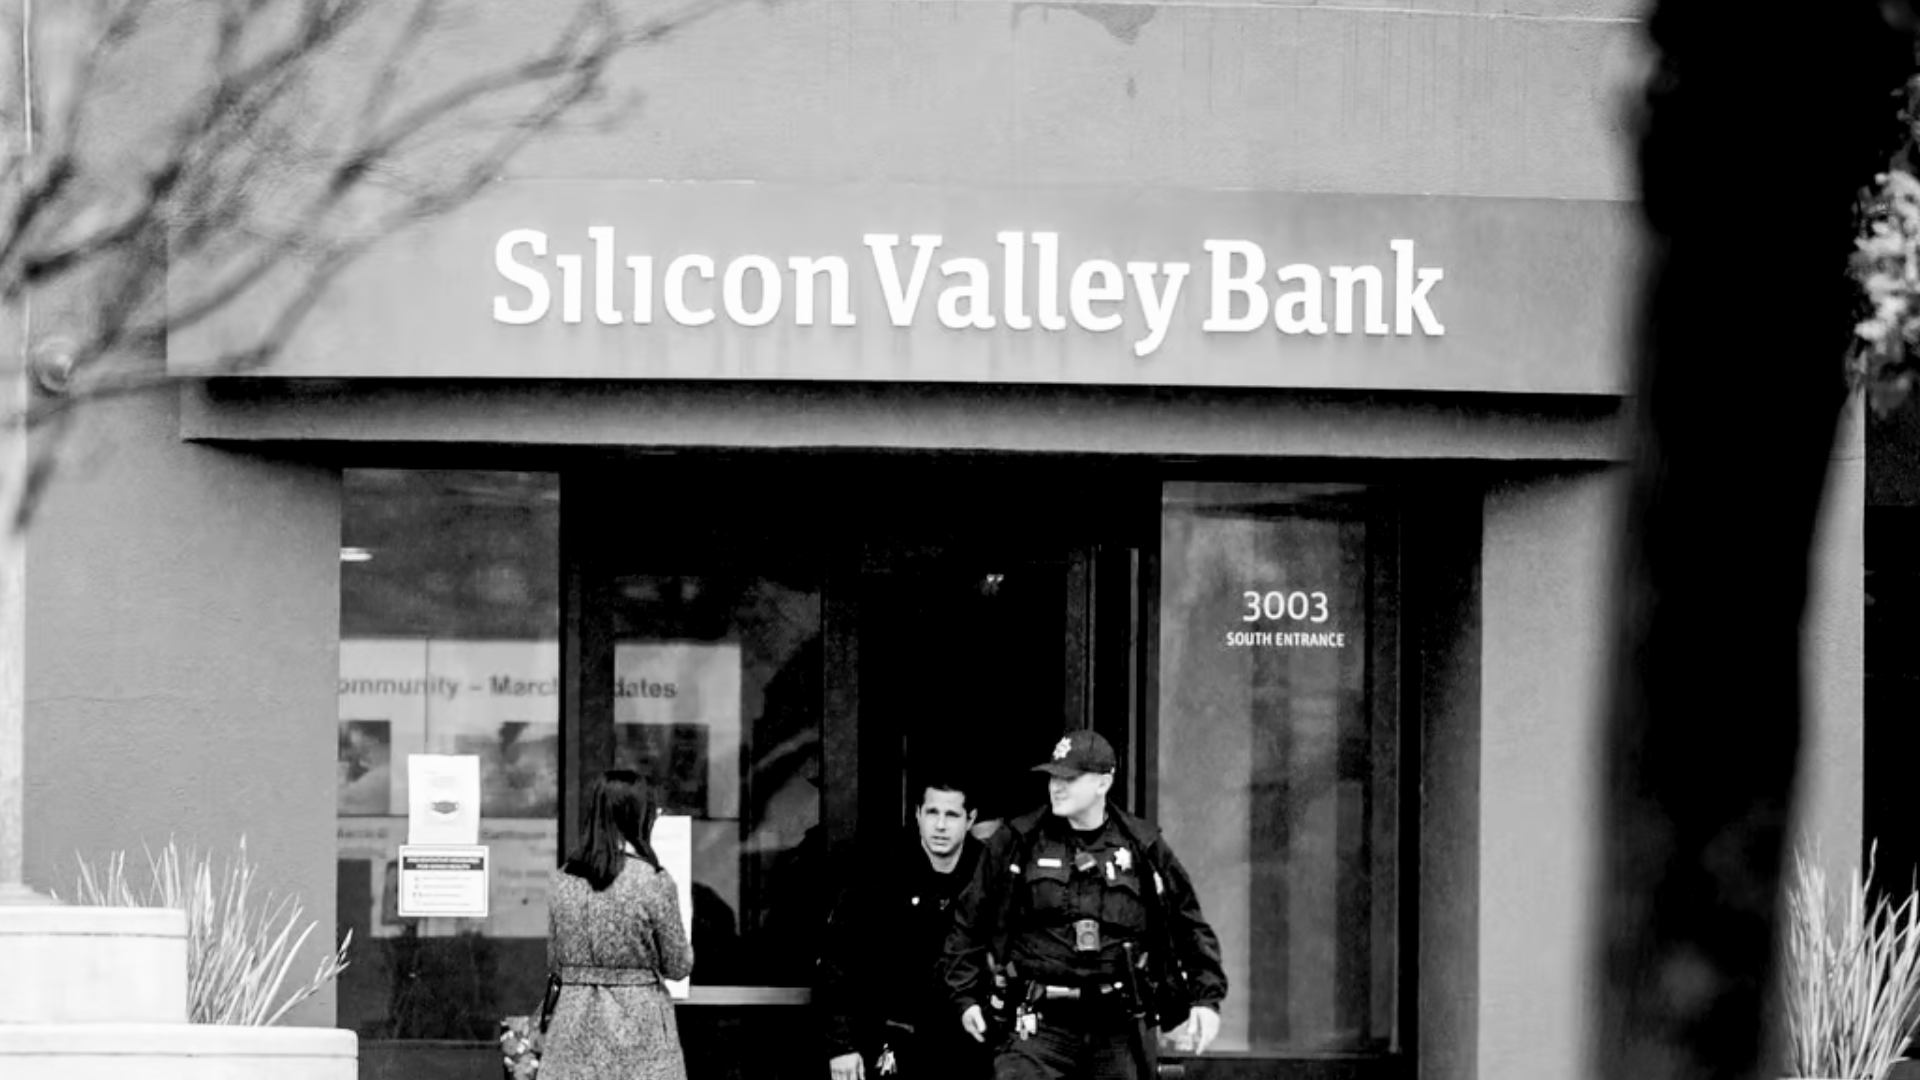 Silicone Valley Bank building in black and white